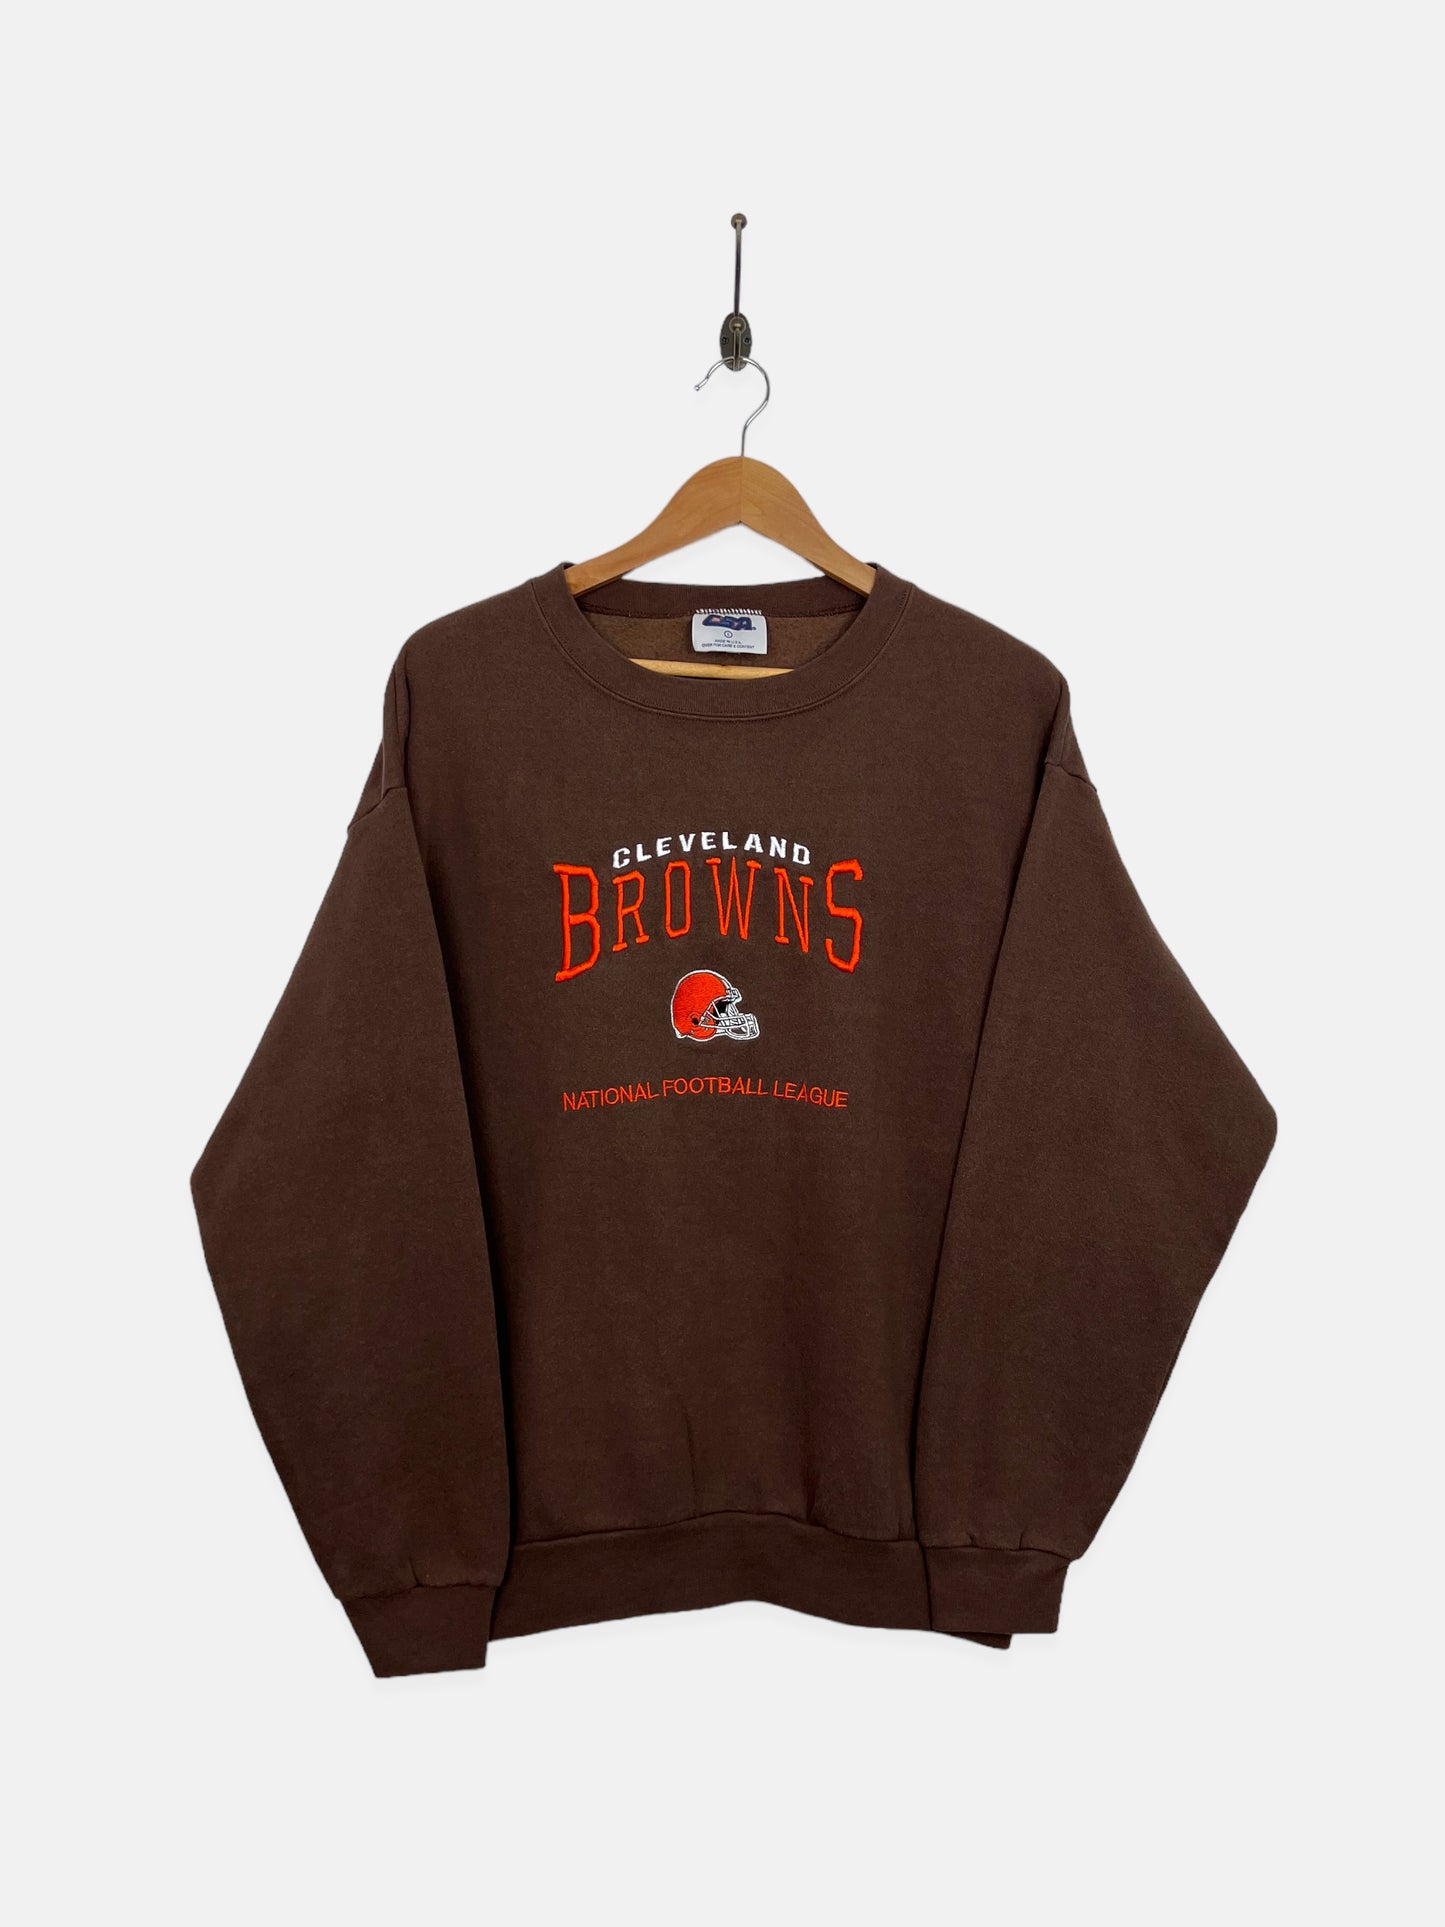 90's Cleveland Browns NFL USA Made Embroidered Vintage Sweatshirt Size M